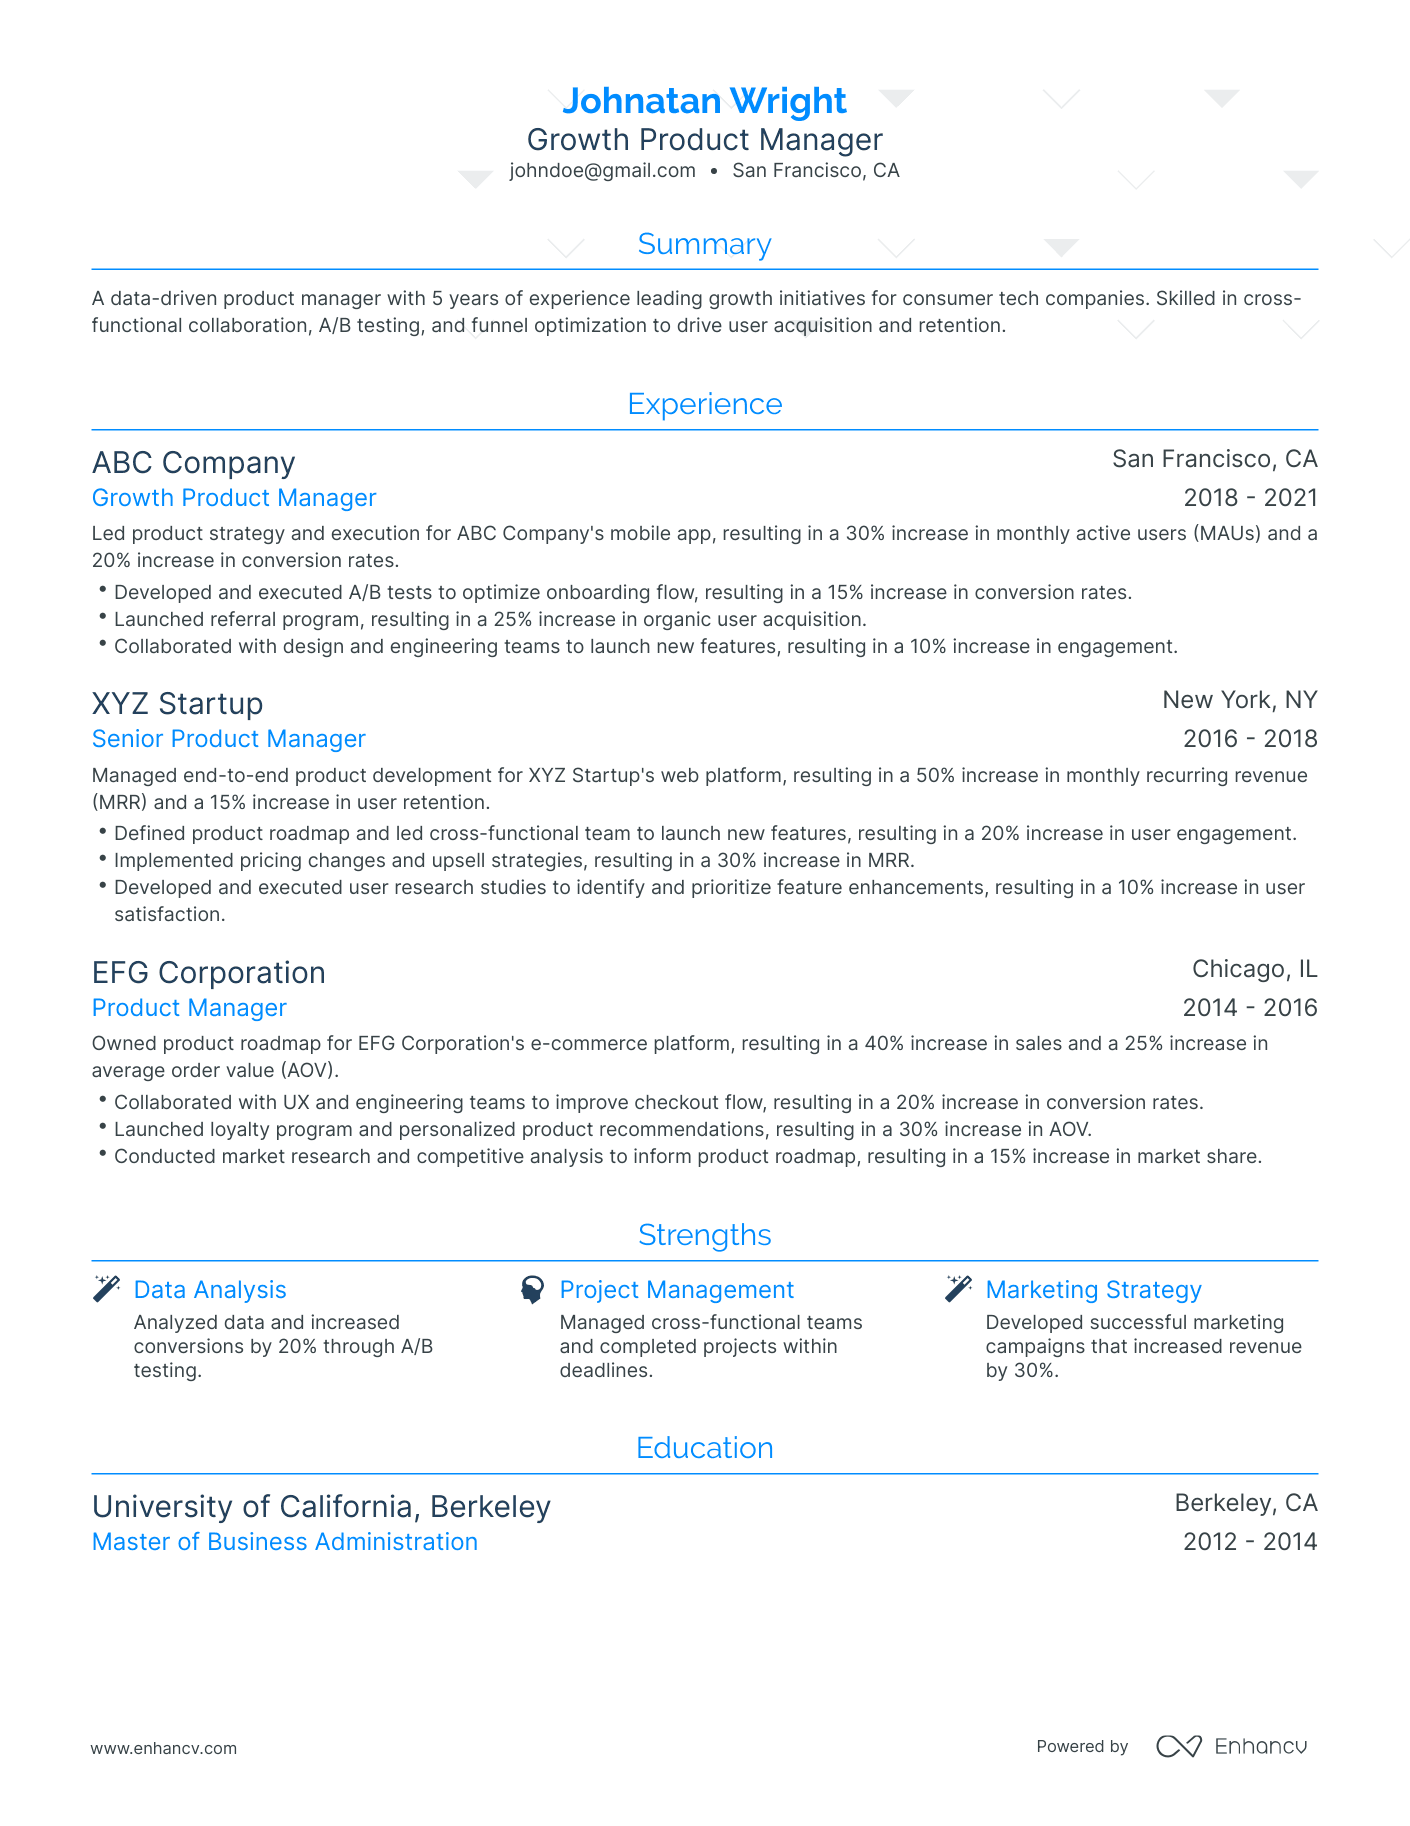 Traditional Growth Product Manager Resume Template